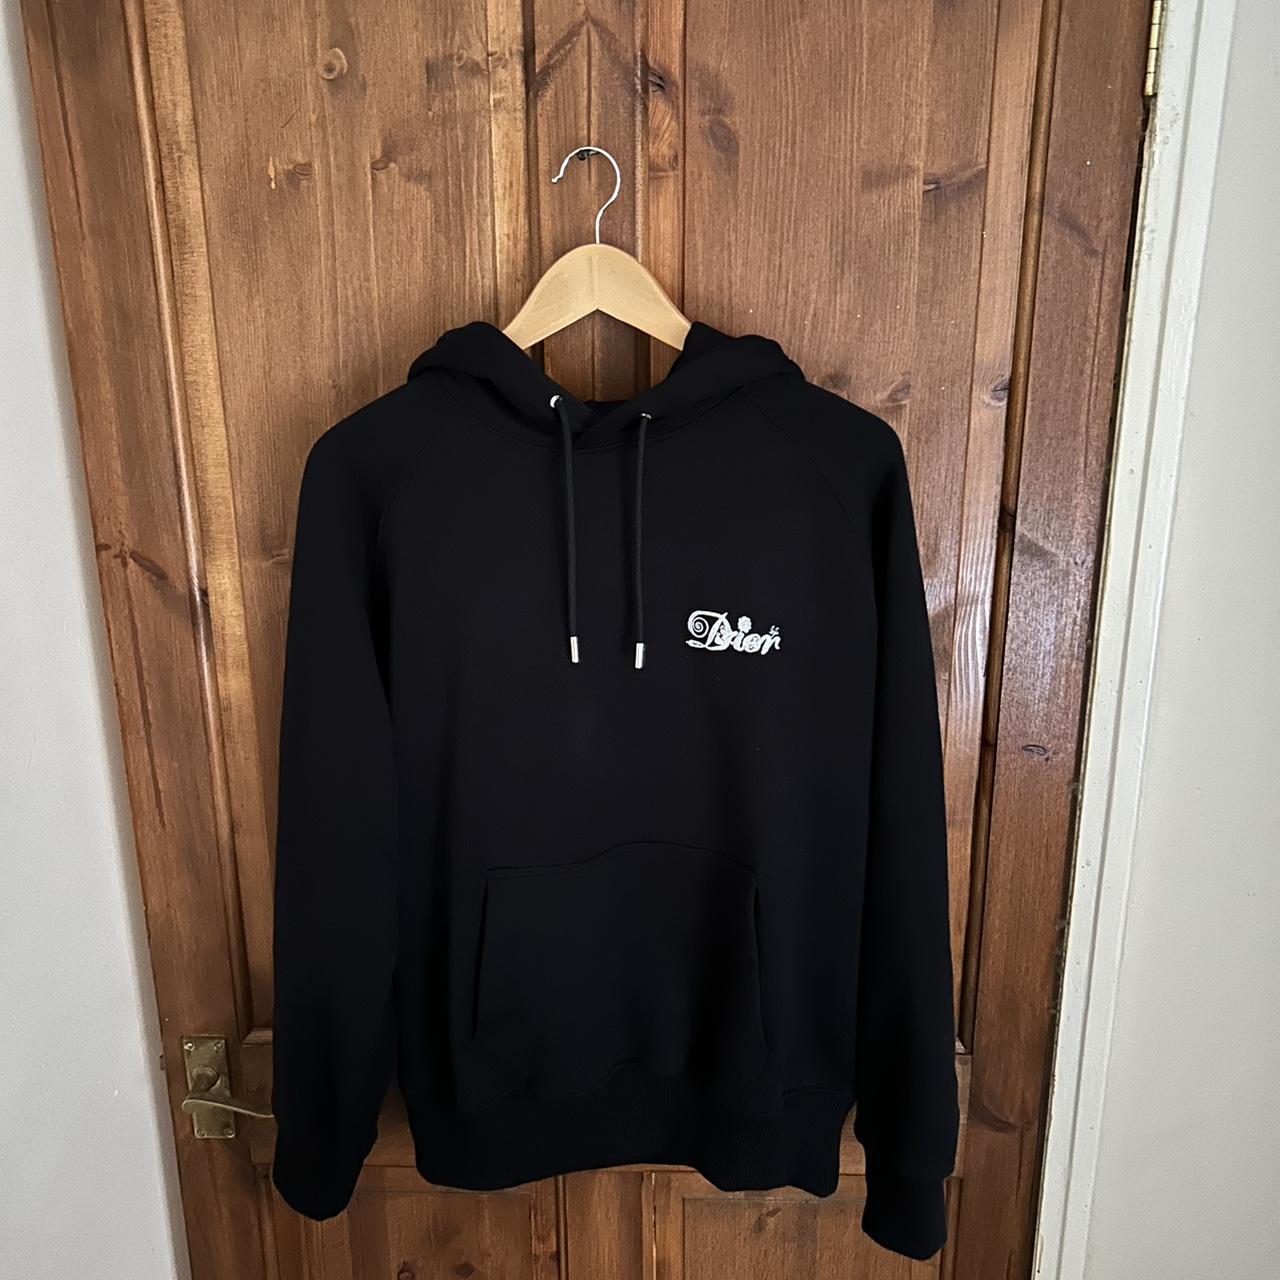 Dior hoodie mint condition sad to see it go but... - Depop